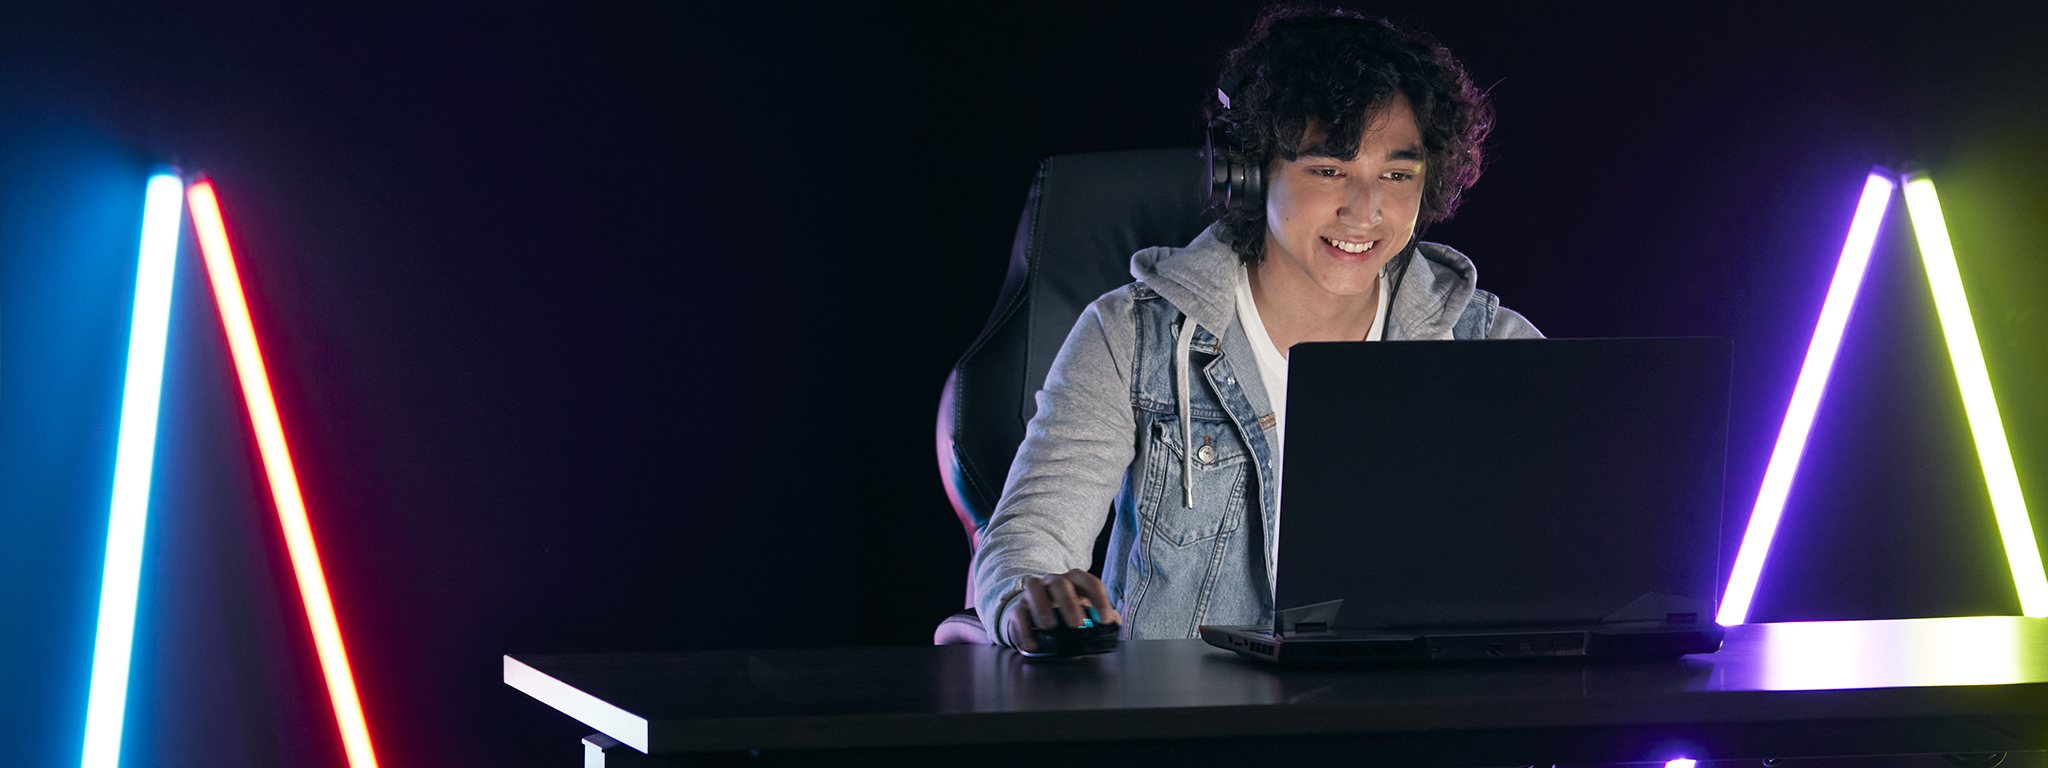 a young gamer playing on his laptop in a dark room